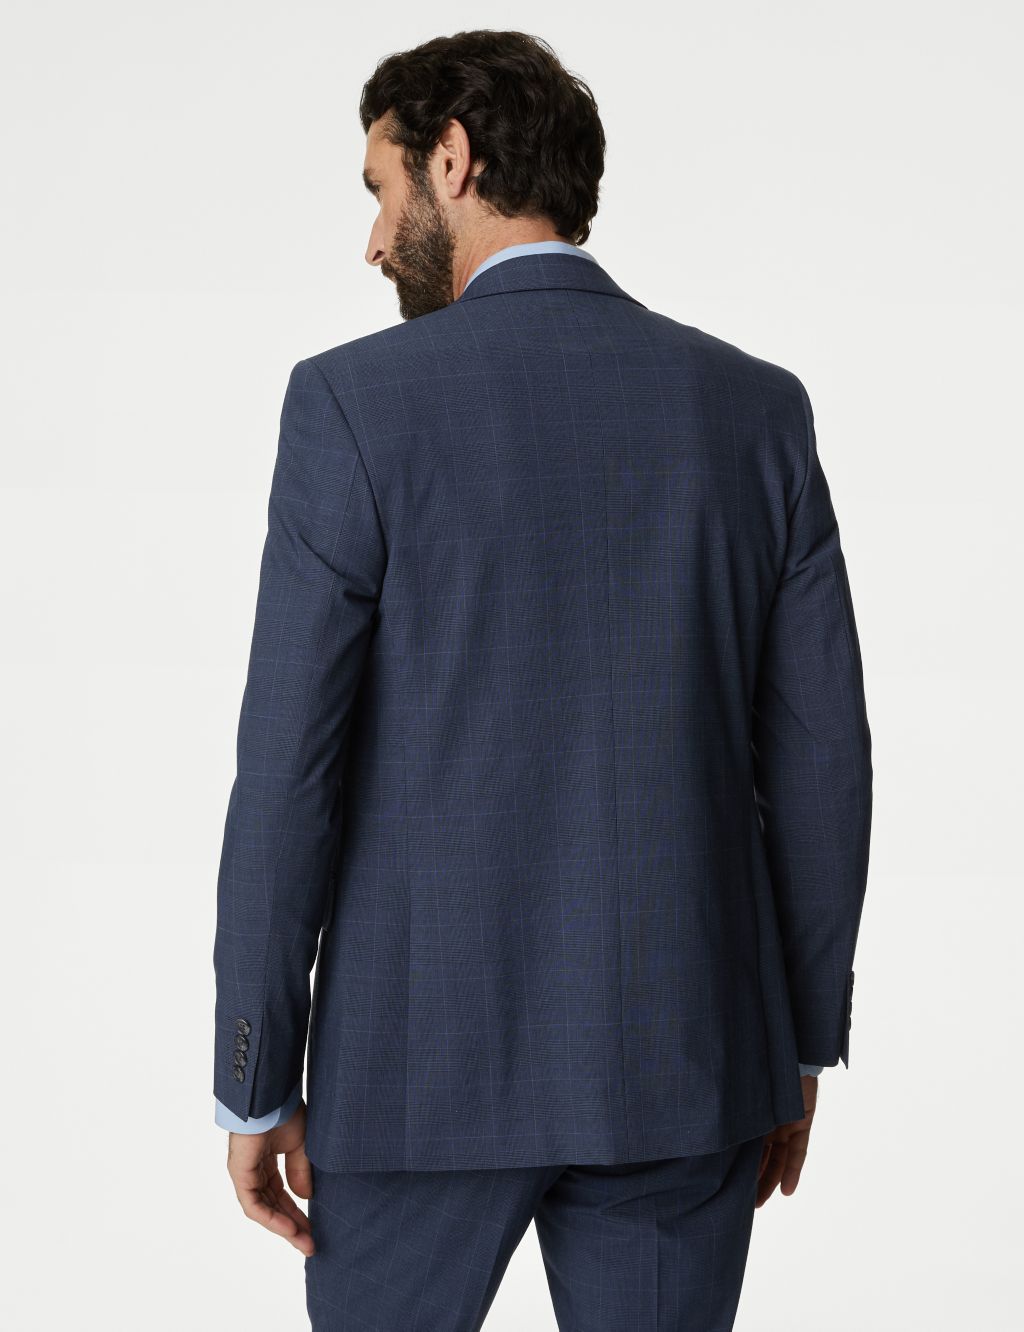 Slim Fit Prince of Wales Check Suit image 3